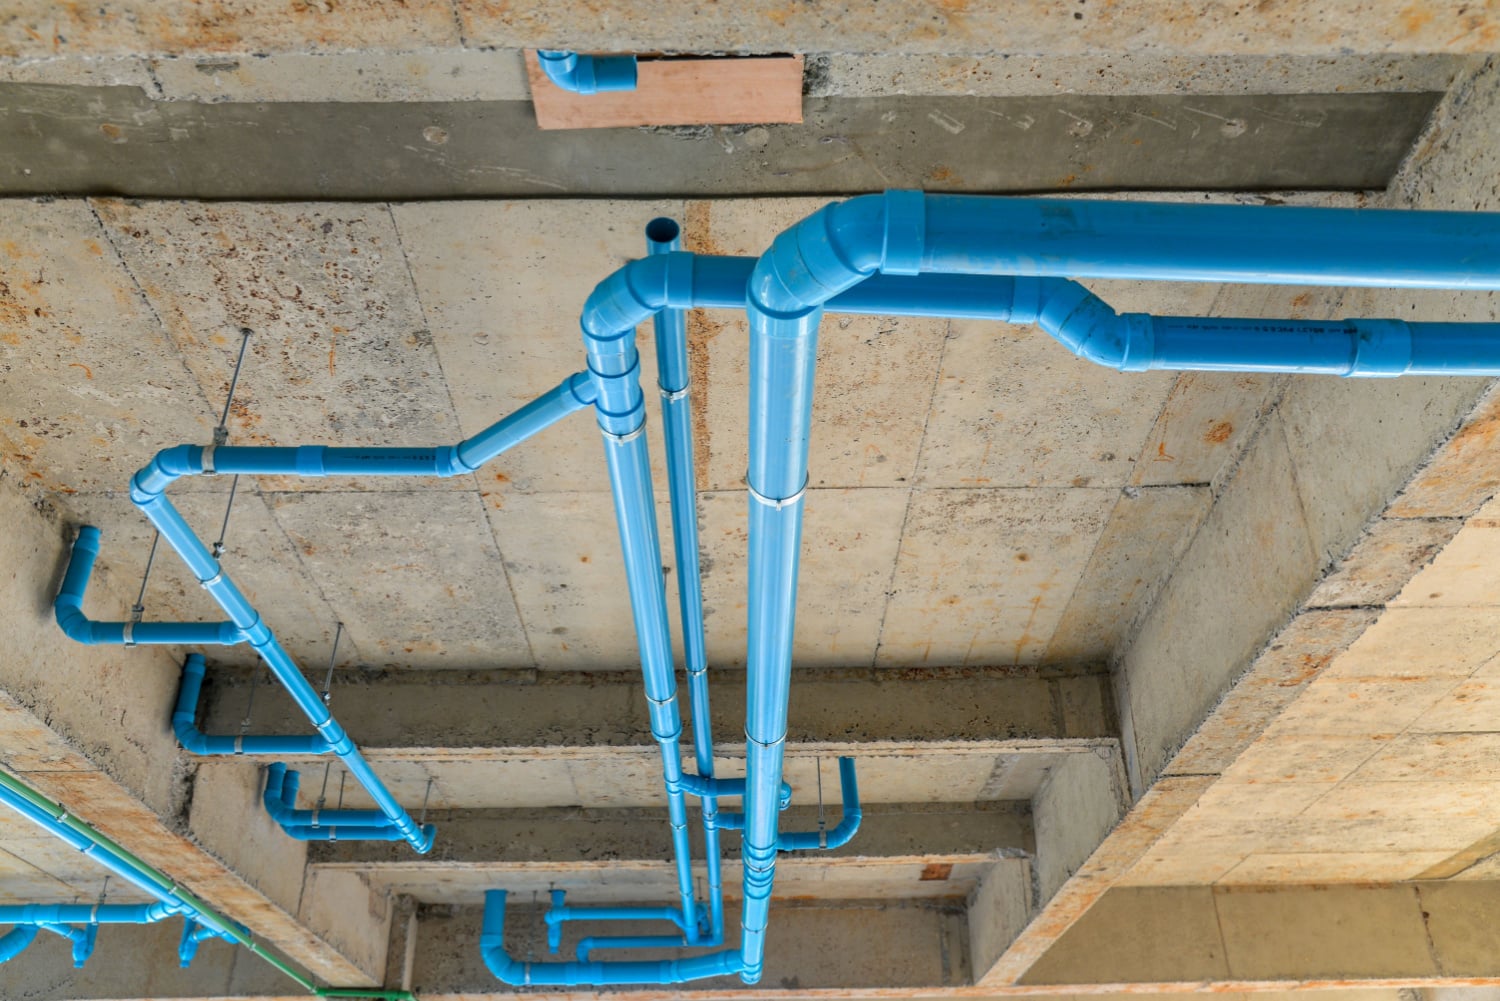 PVC pipes plumbing system on the ceiling